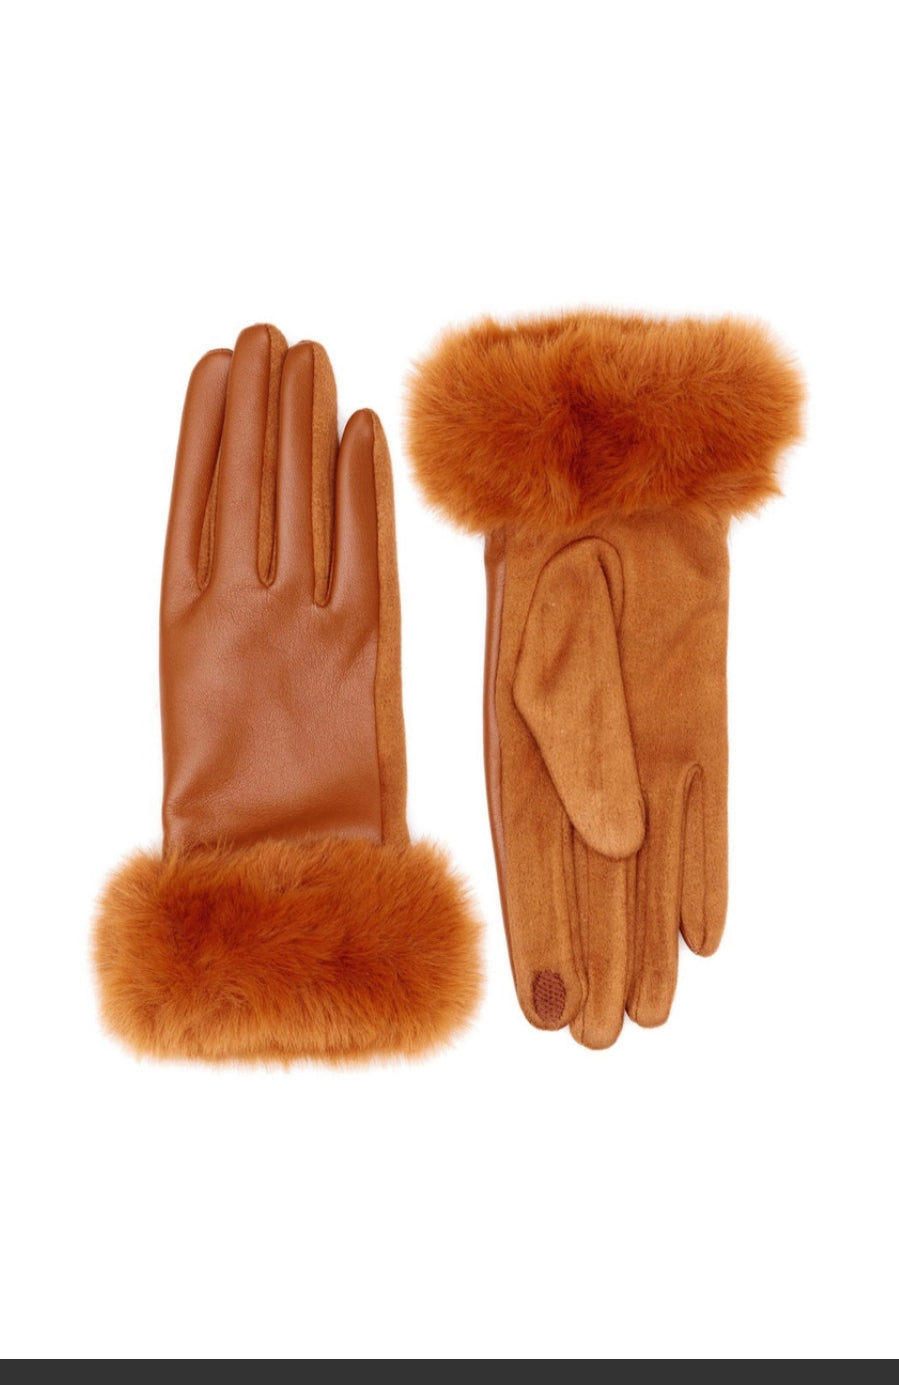 Vegan Leather and Suede Fur Trimmed Gloves - SELFTRITSS